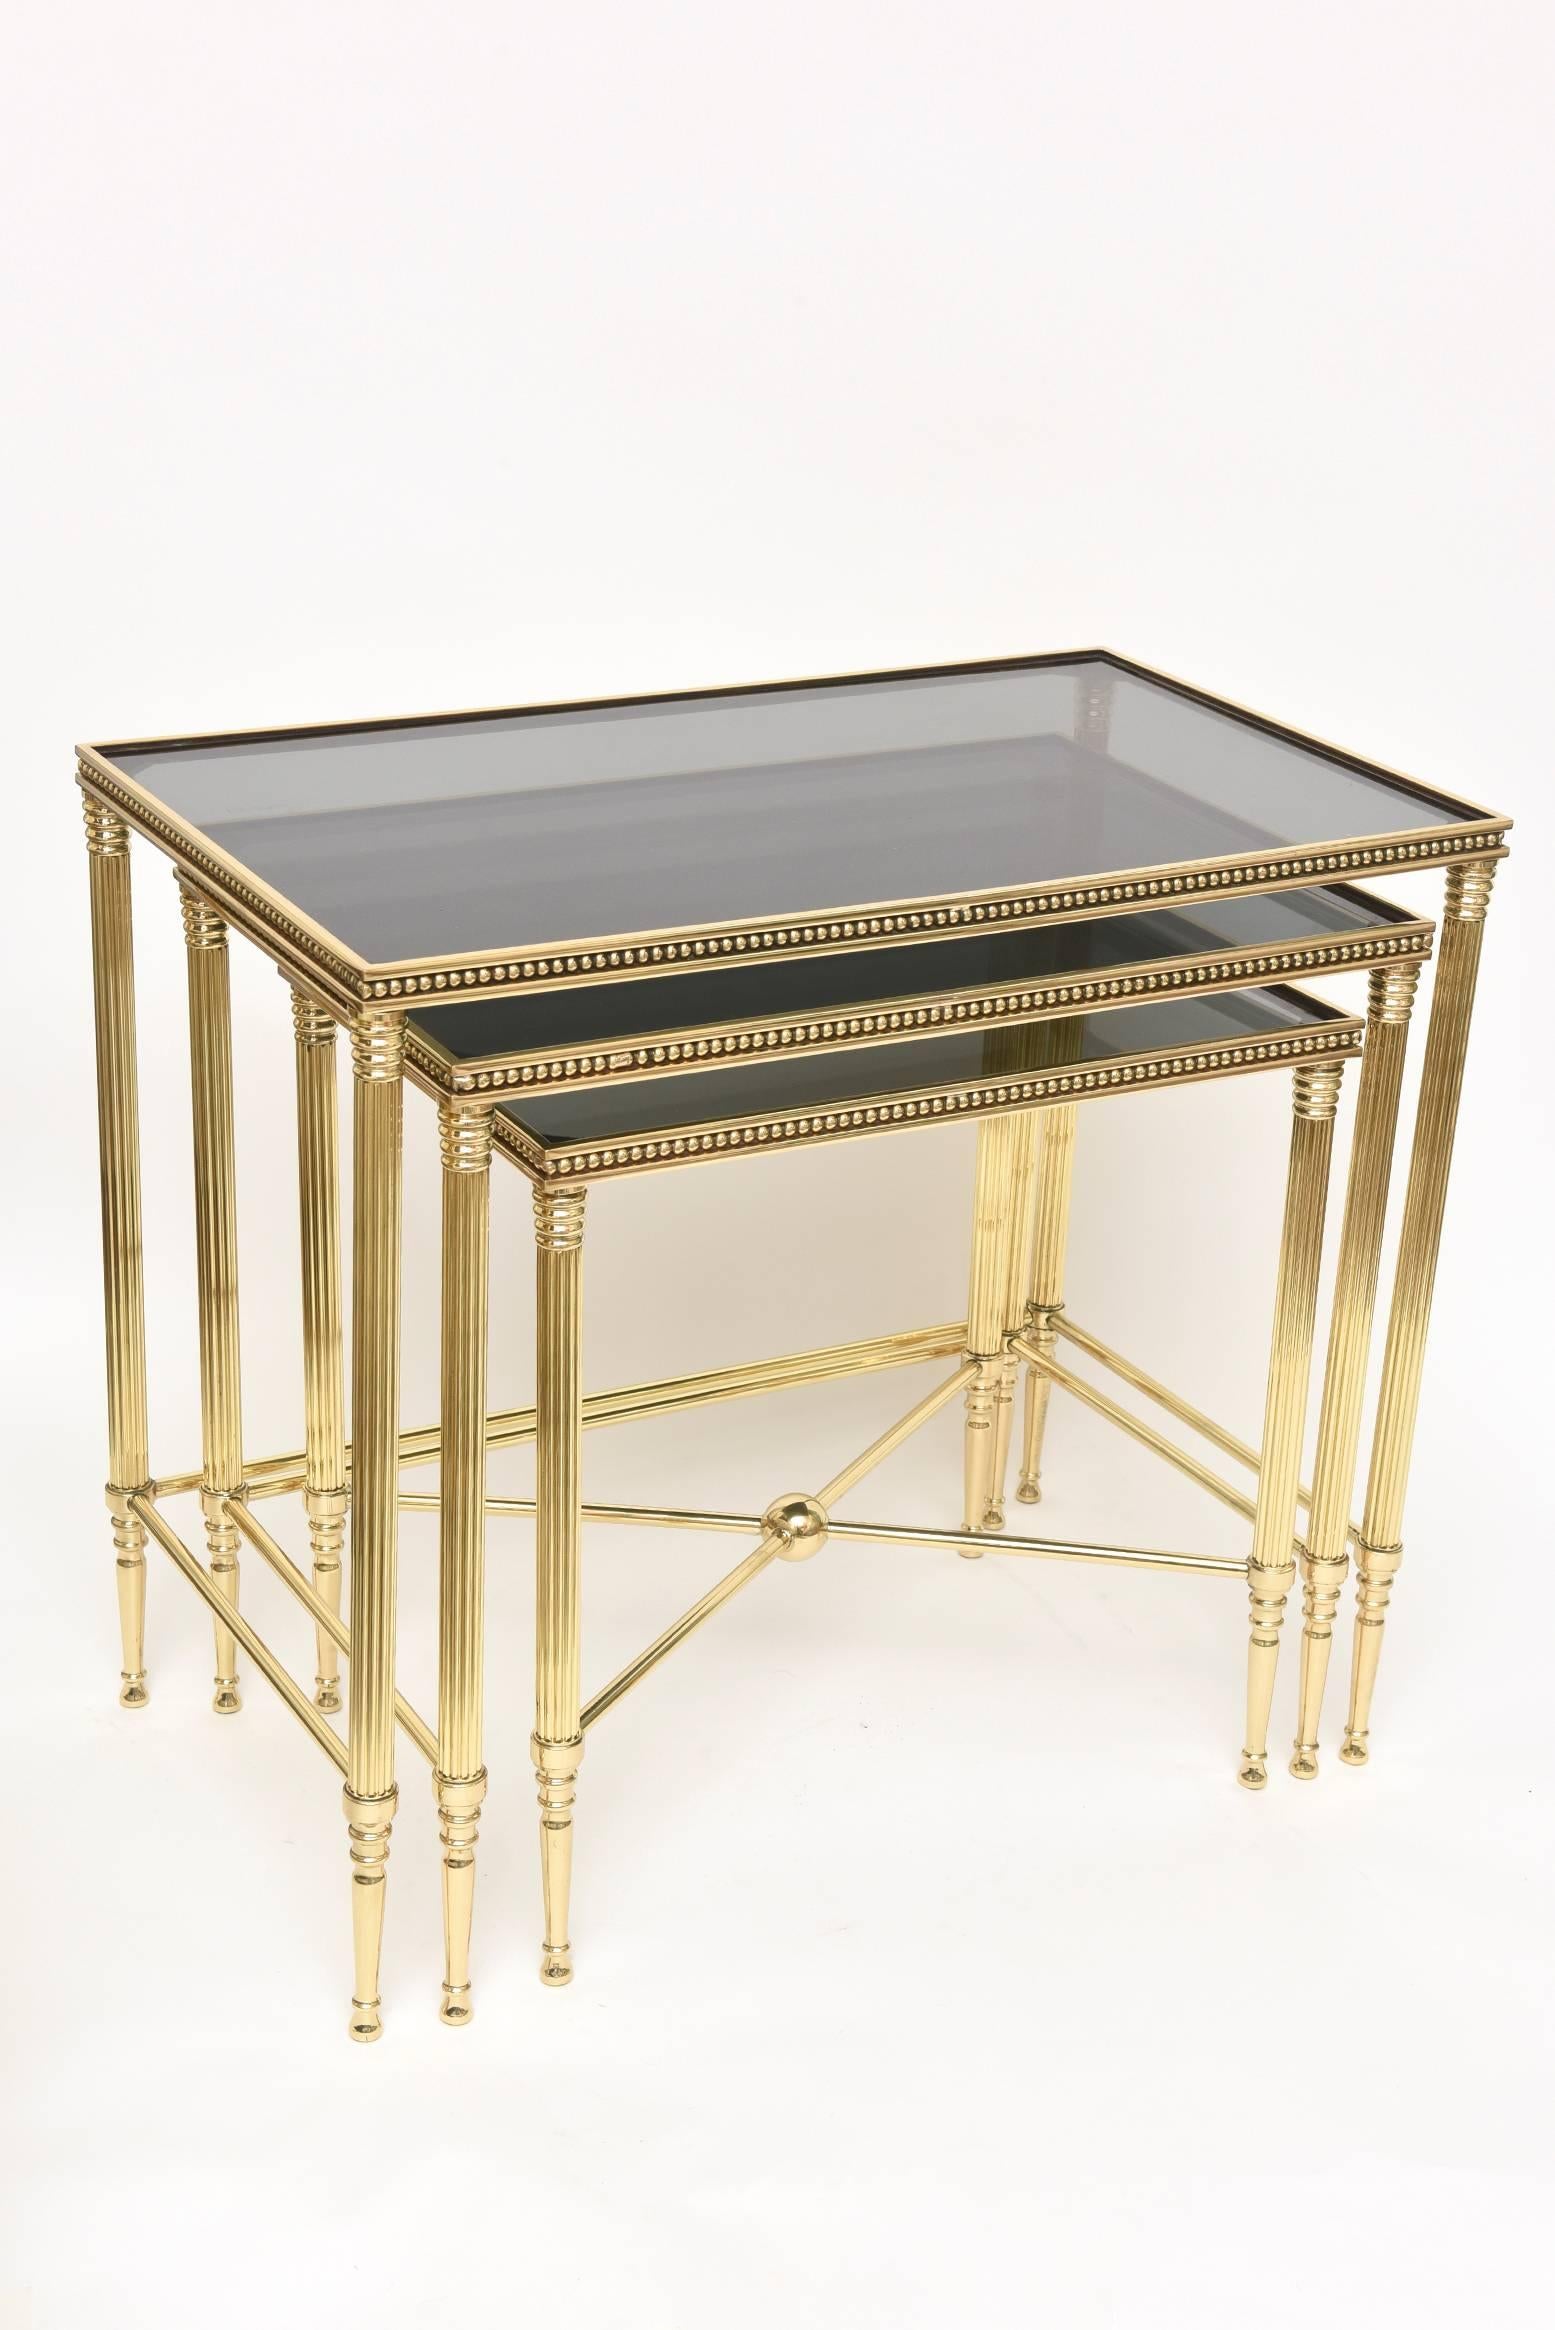 These Classic and elegant solid brass nesting tables are from the 1950s and are Italian and stamped as such. The solid brass has been gloriously polished professionally. They are very much in the style of Maison Bagues. The fluted column legs with